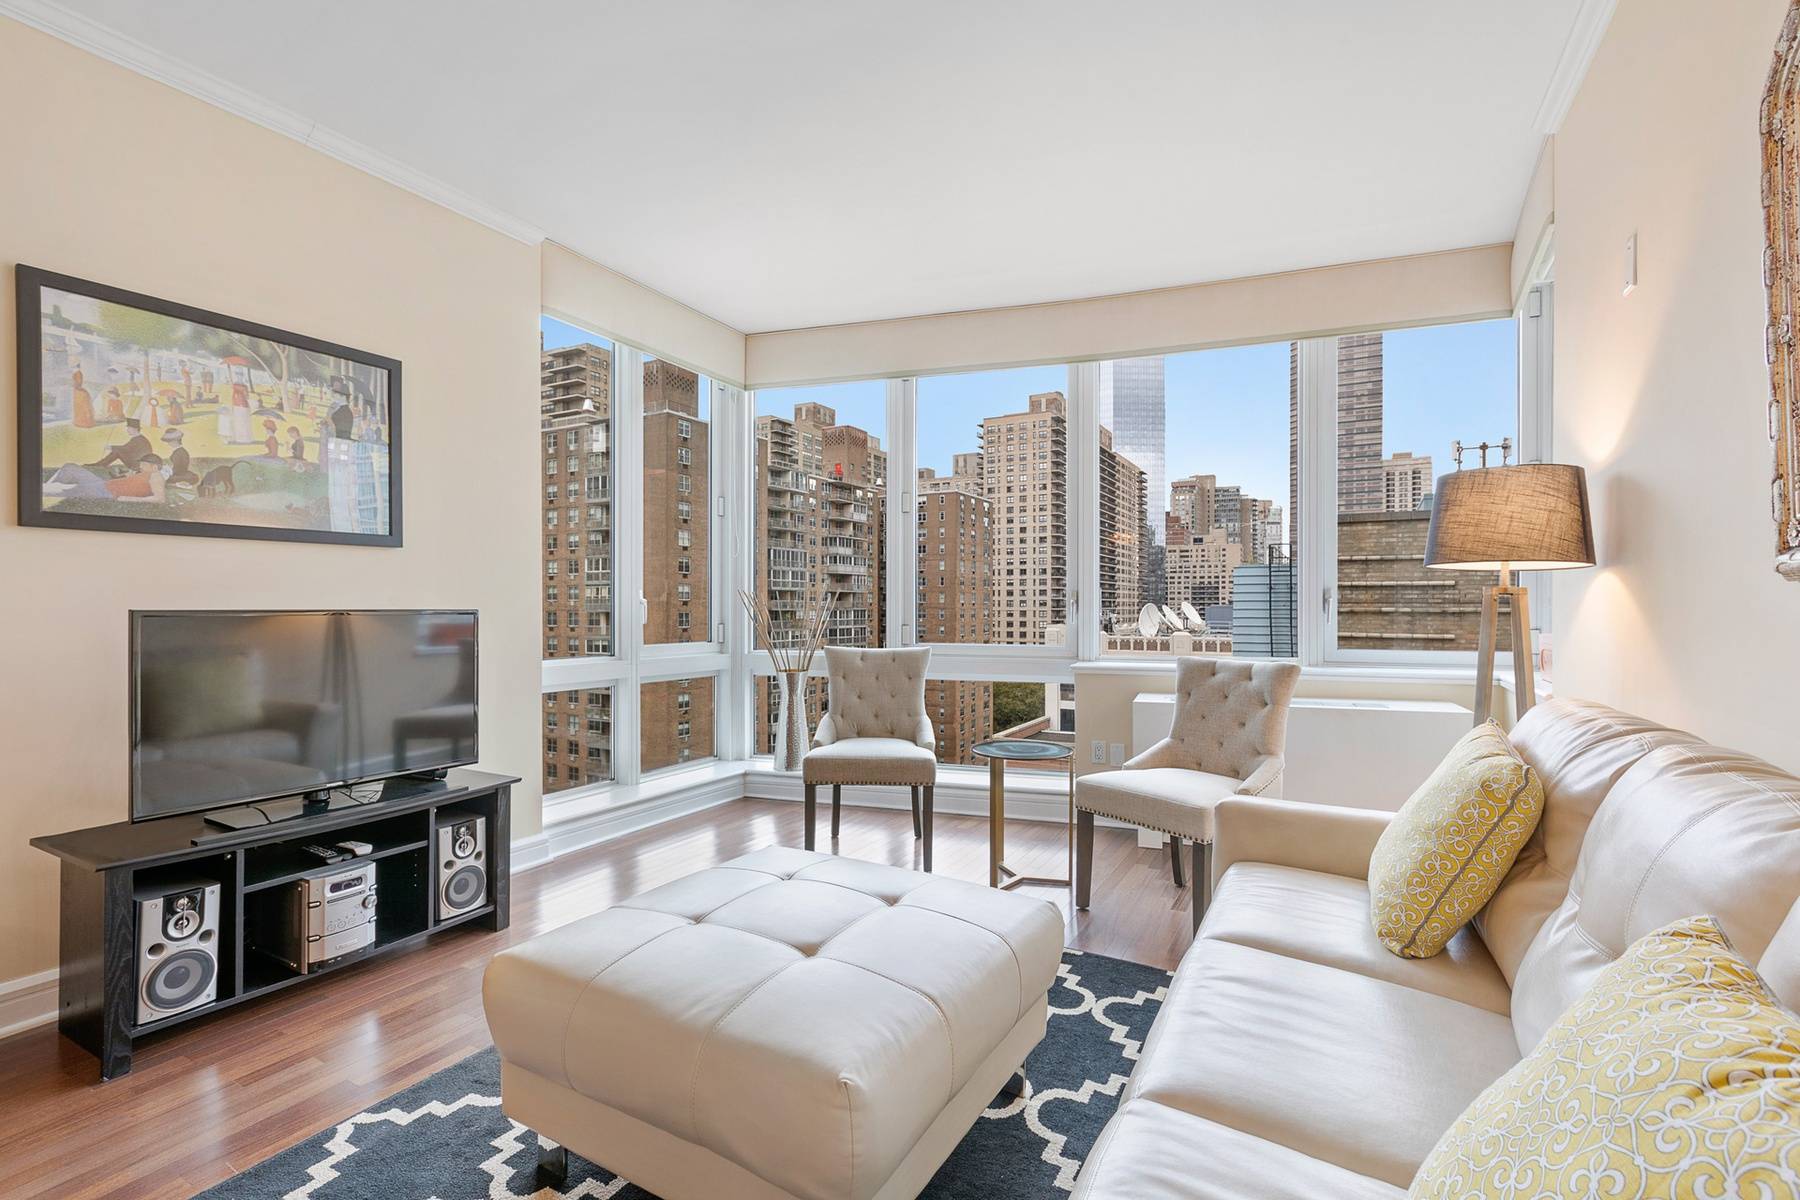 800 SF 1 Bedroom with Bright Eastern Exposure & Open City Views!